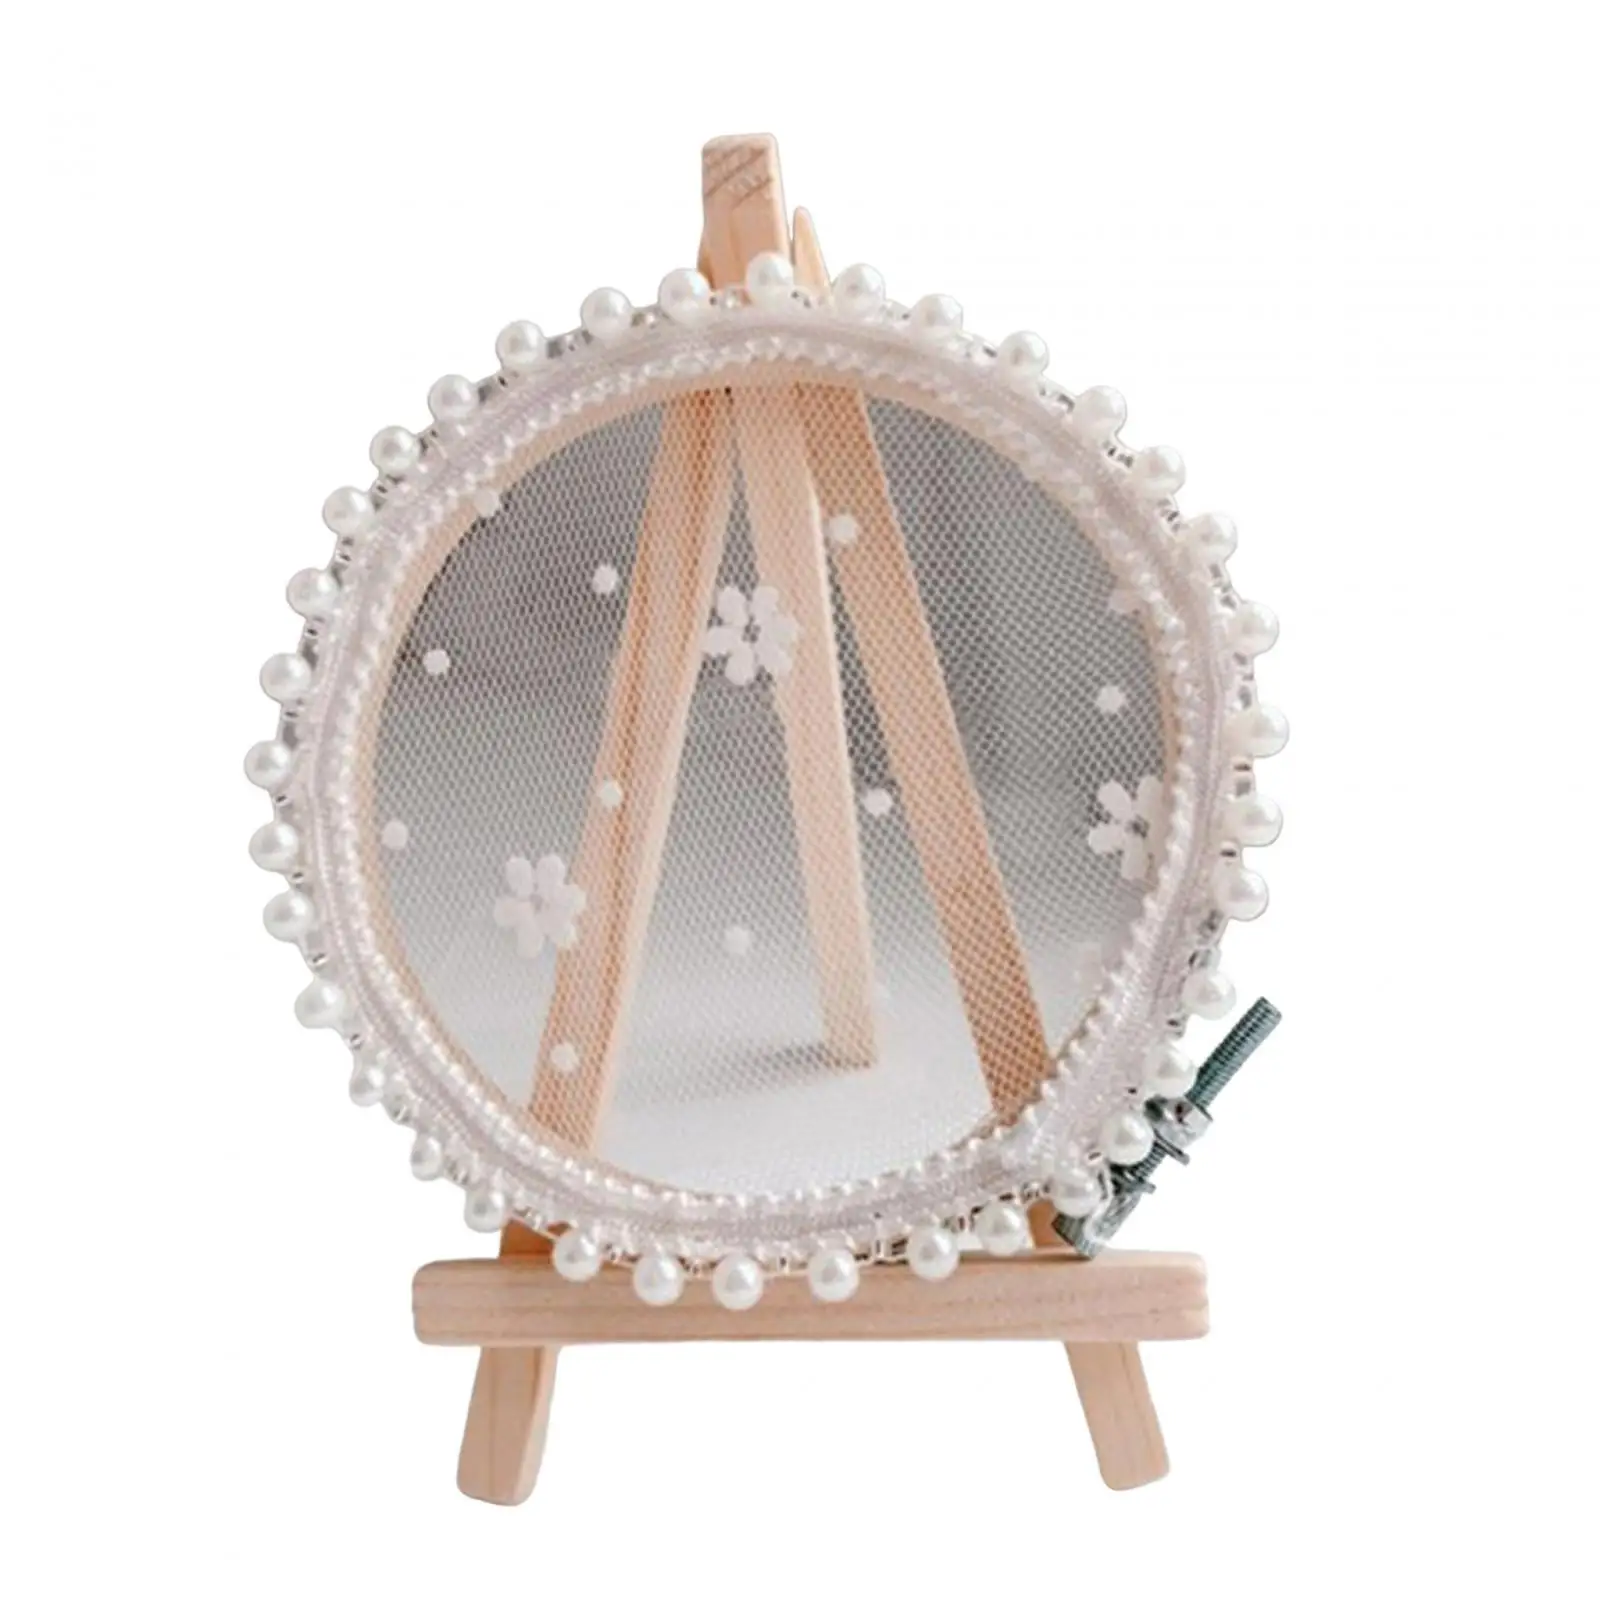 Earring Stand Photography Display Props Lace Earring Holder Jewelry Organizer for Closet Countertop Vanity Table Wardrobe